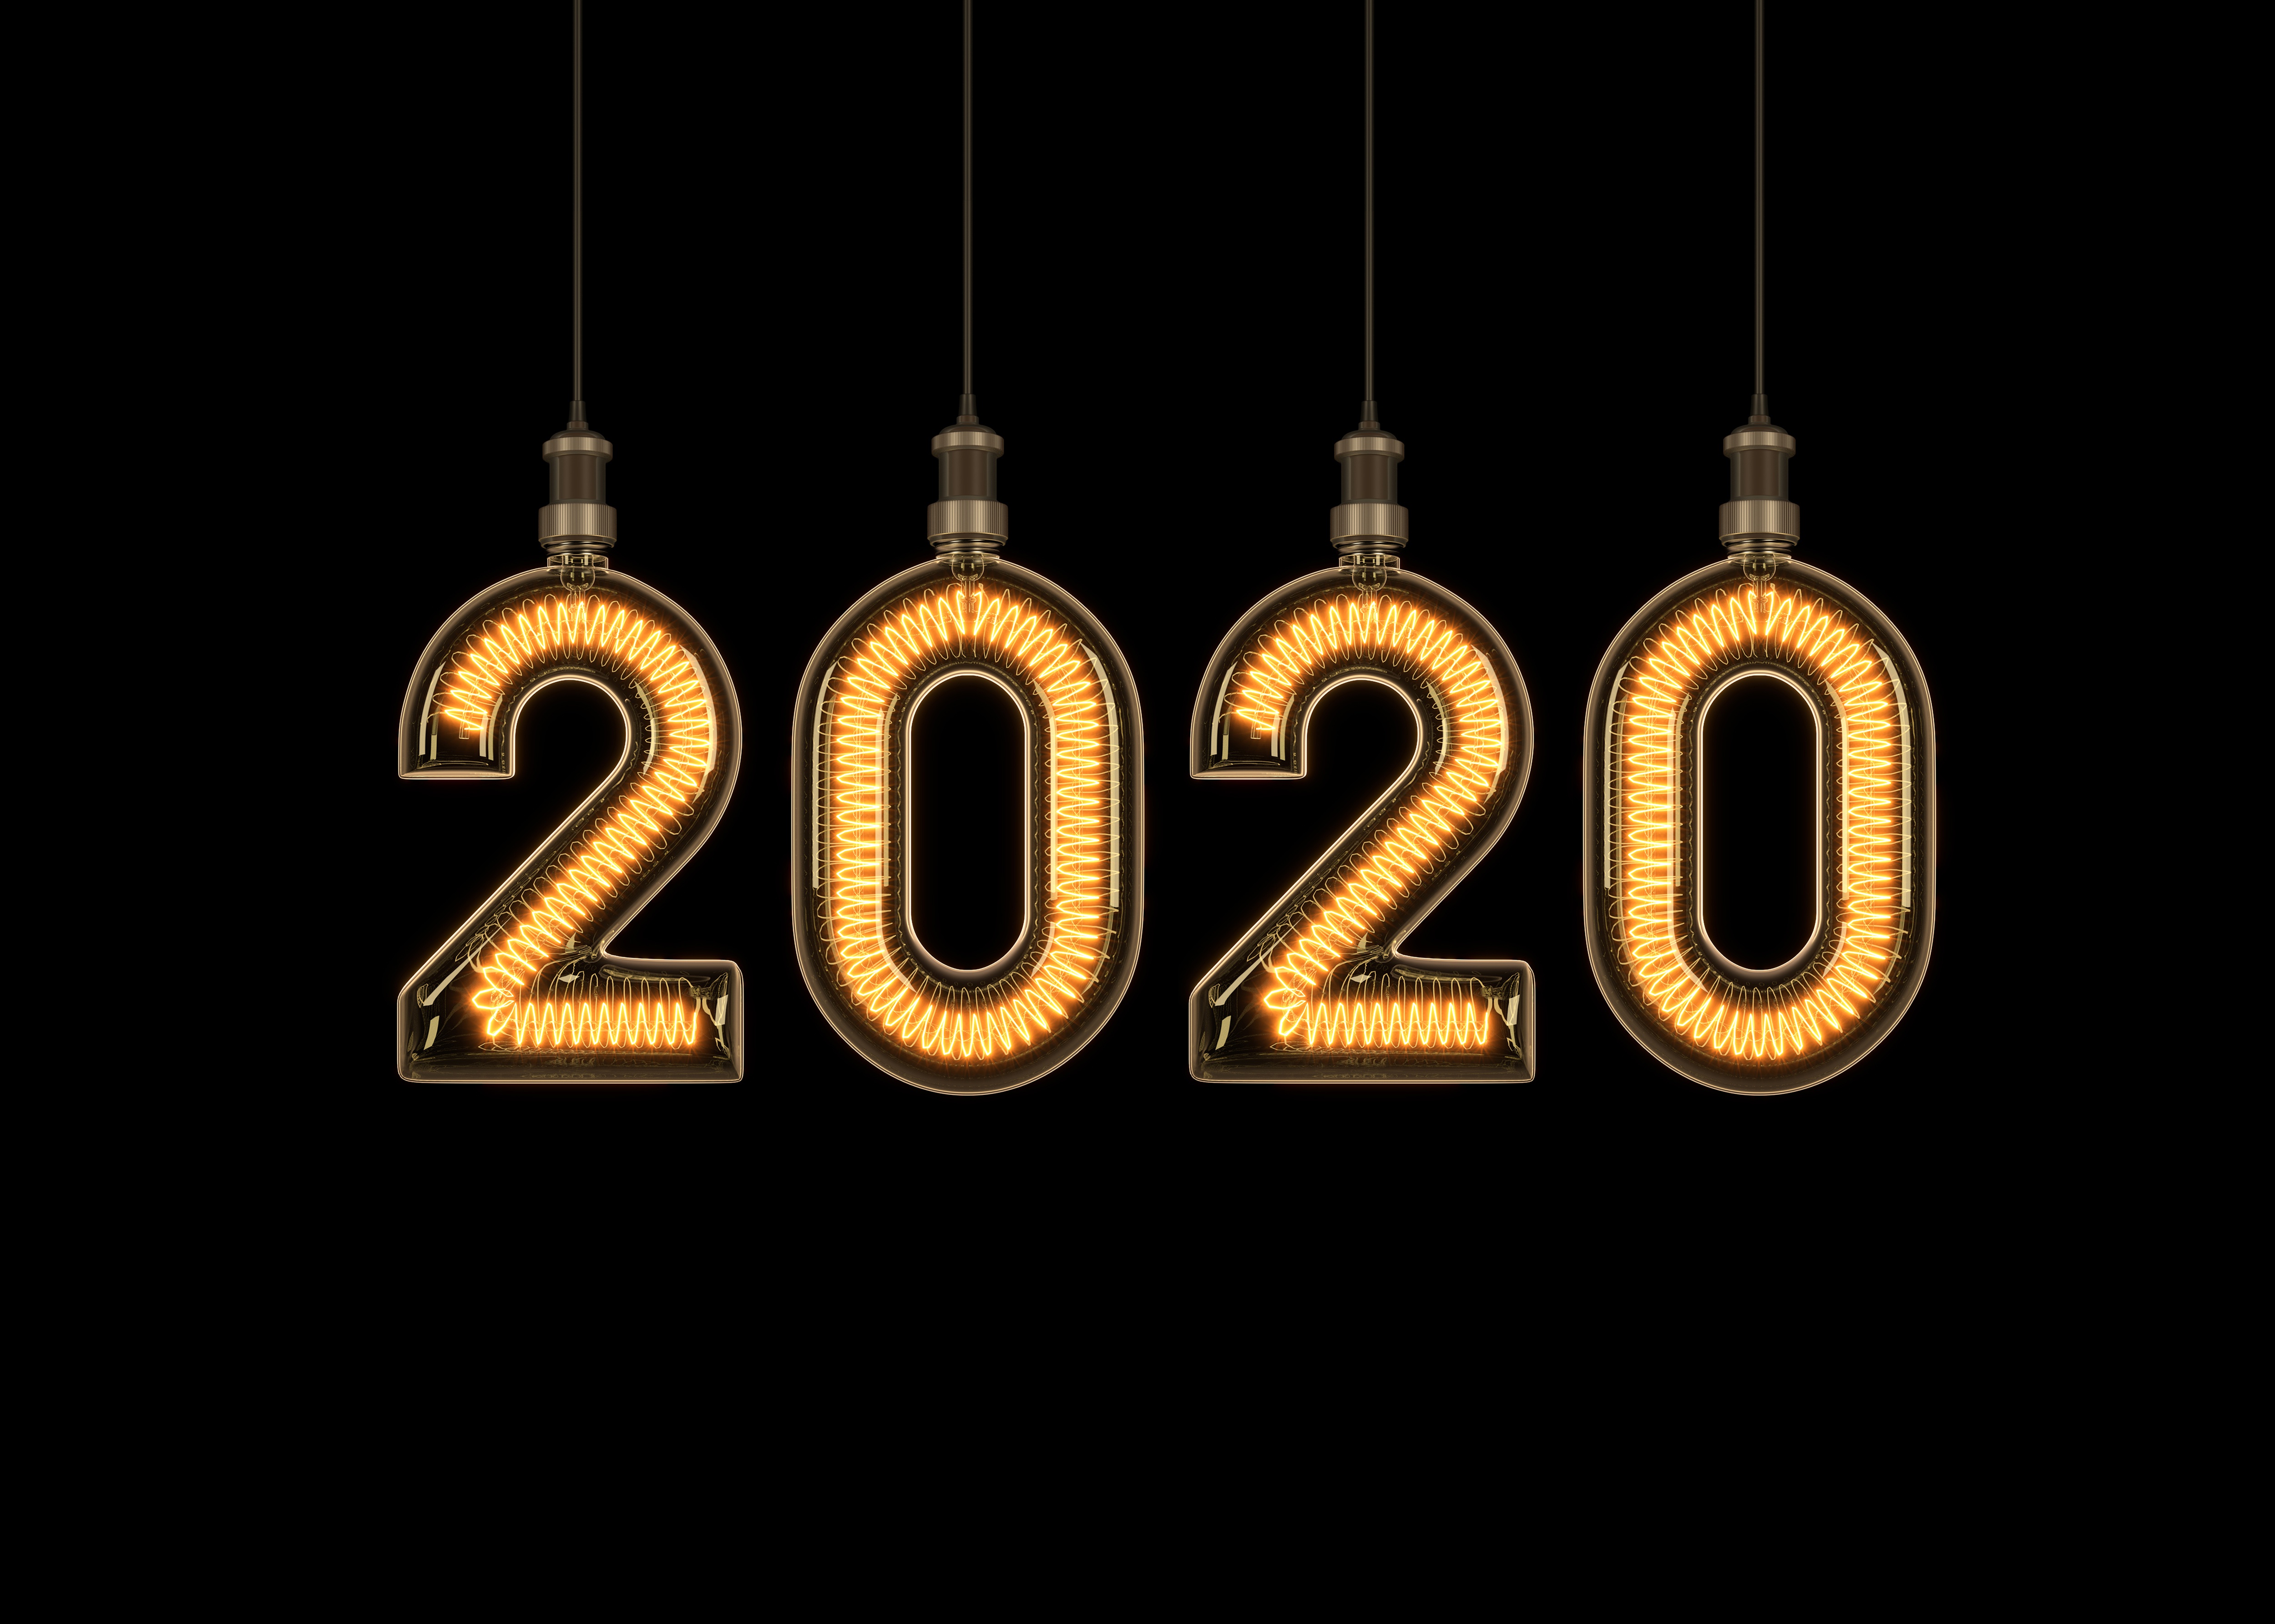 New Year 2020 4k Ultra HD Wallpaper | Background Image ...